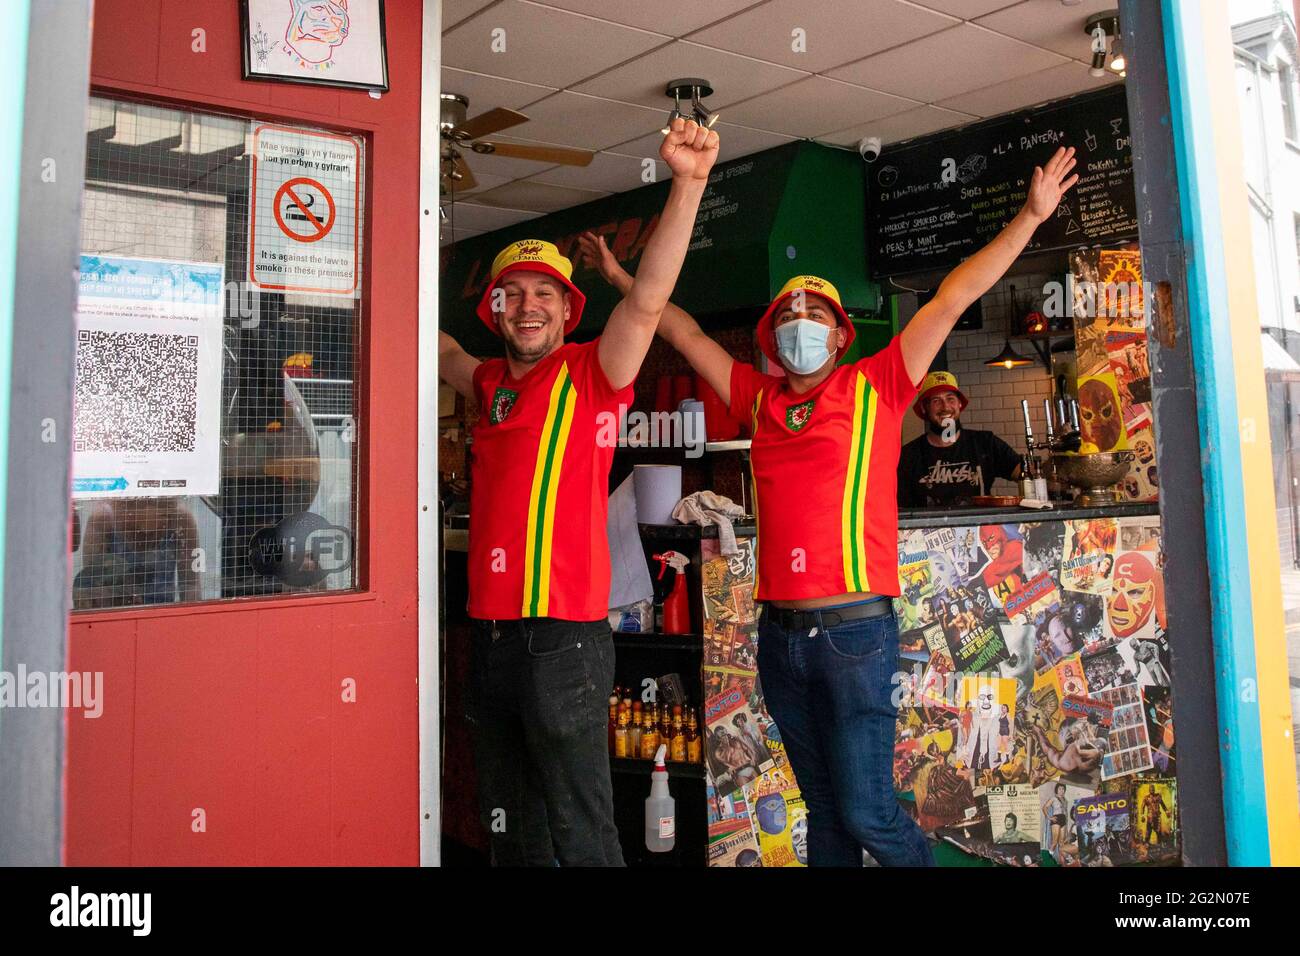 Cardiff, Wales, UK. 12th June, 2021. Wales football supporters in celebratory mood in a Cardiff city centre cafe ahead of their side's opening match of the coronavirus delayed Euro 2020 tournament against Switzerland in Azerbaijan. Credit: Mark Hawkins/Alamy Live News Stock Photo